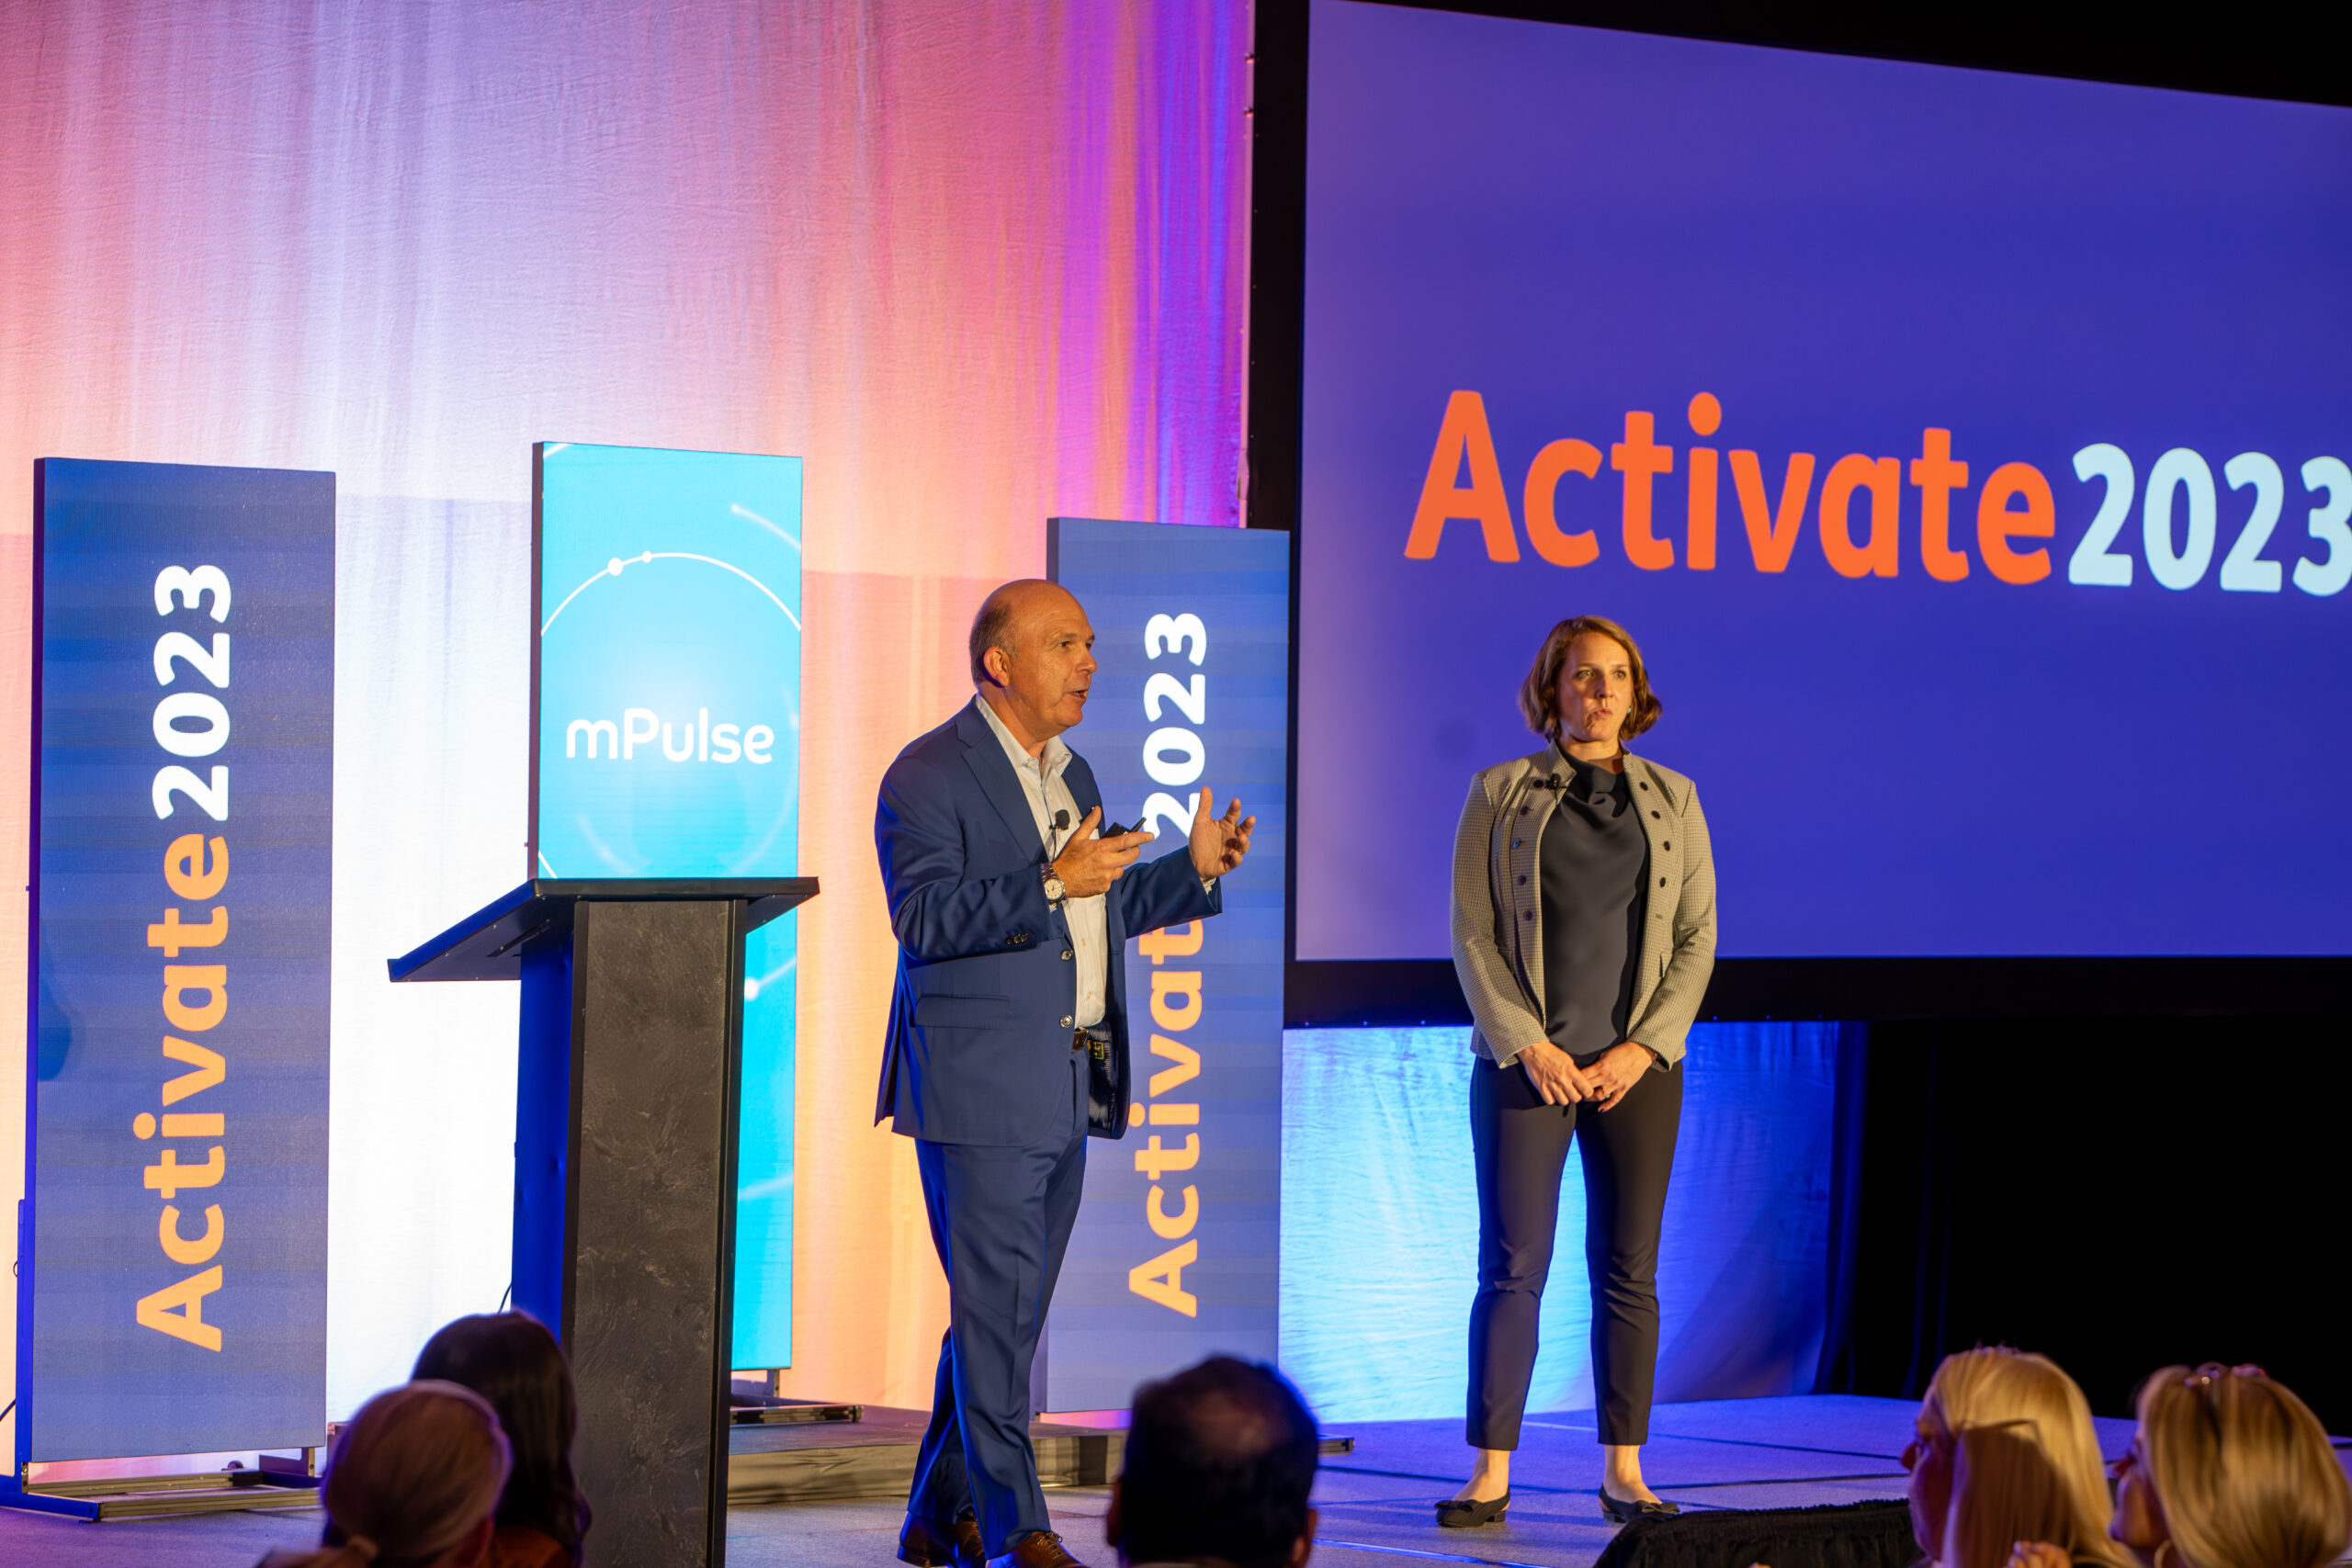 mPulse Recognizes Innovative Healthcare Organizations in the Sixth Annual Activate 2023 Awards